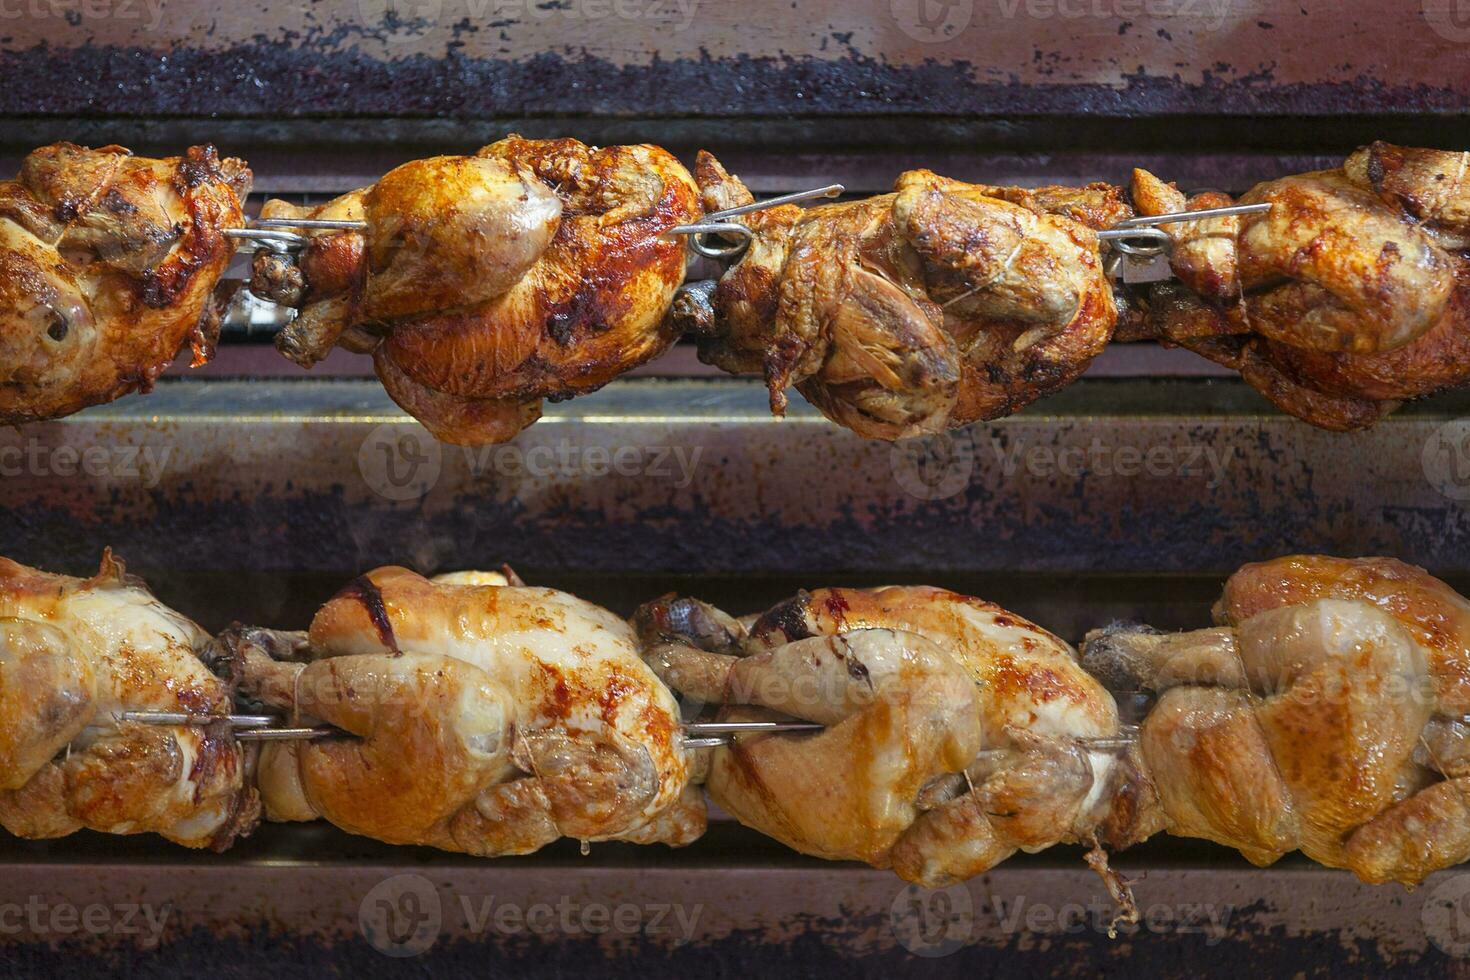 Two rows of chickens in a rotisserie photo